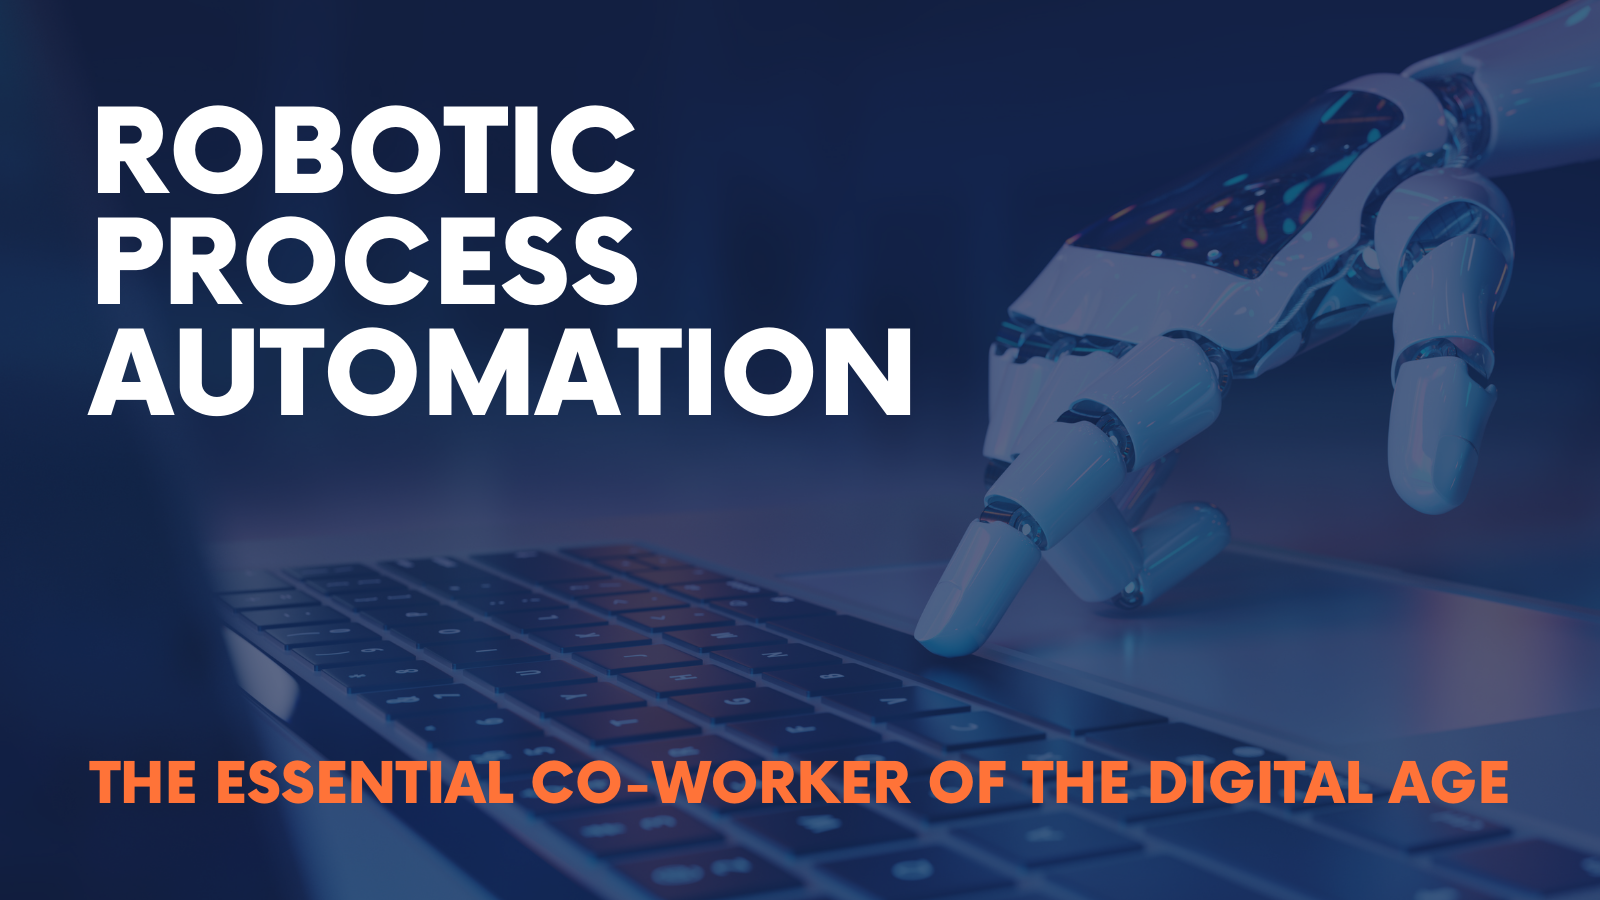 Robotic Process Automation: An Essential Co-worker for the Digital Age